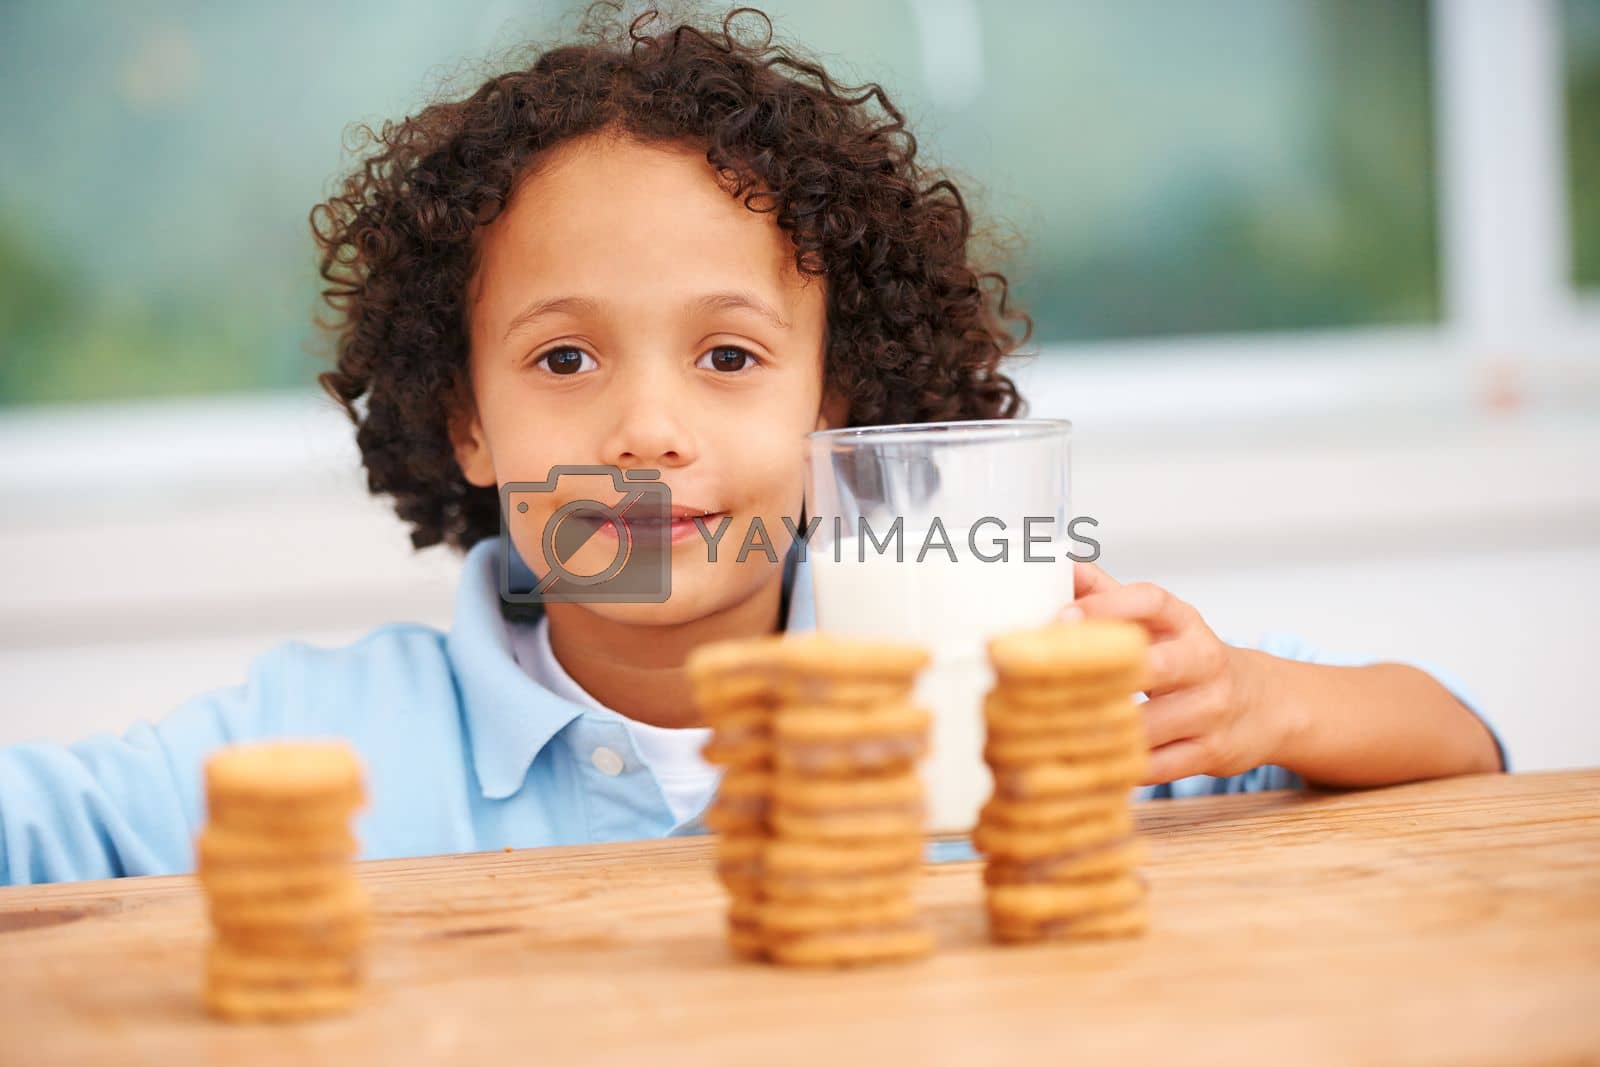 Royalty free image of Mmm, so many cookies just for me. A cute young boy grabbing a cookie from the cookie jar. by YuriArcurs